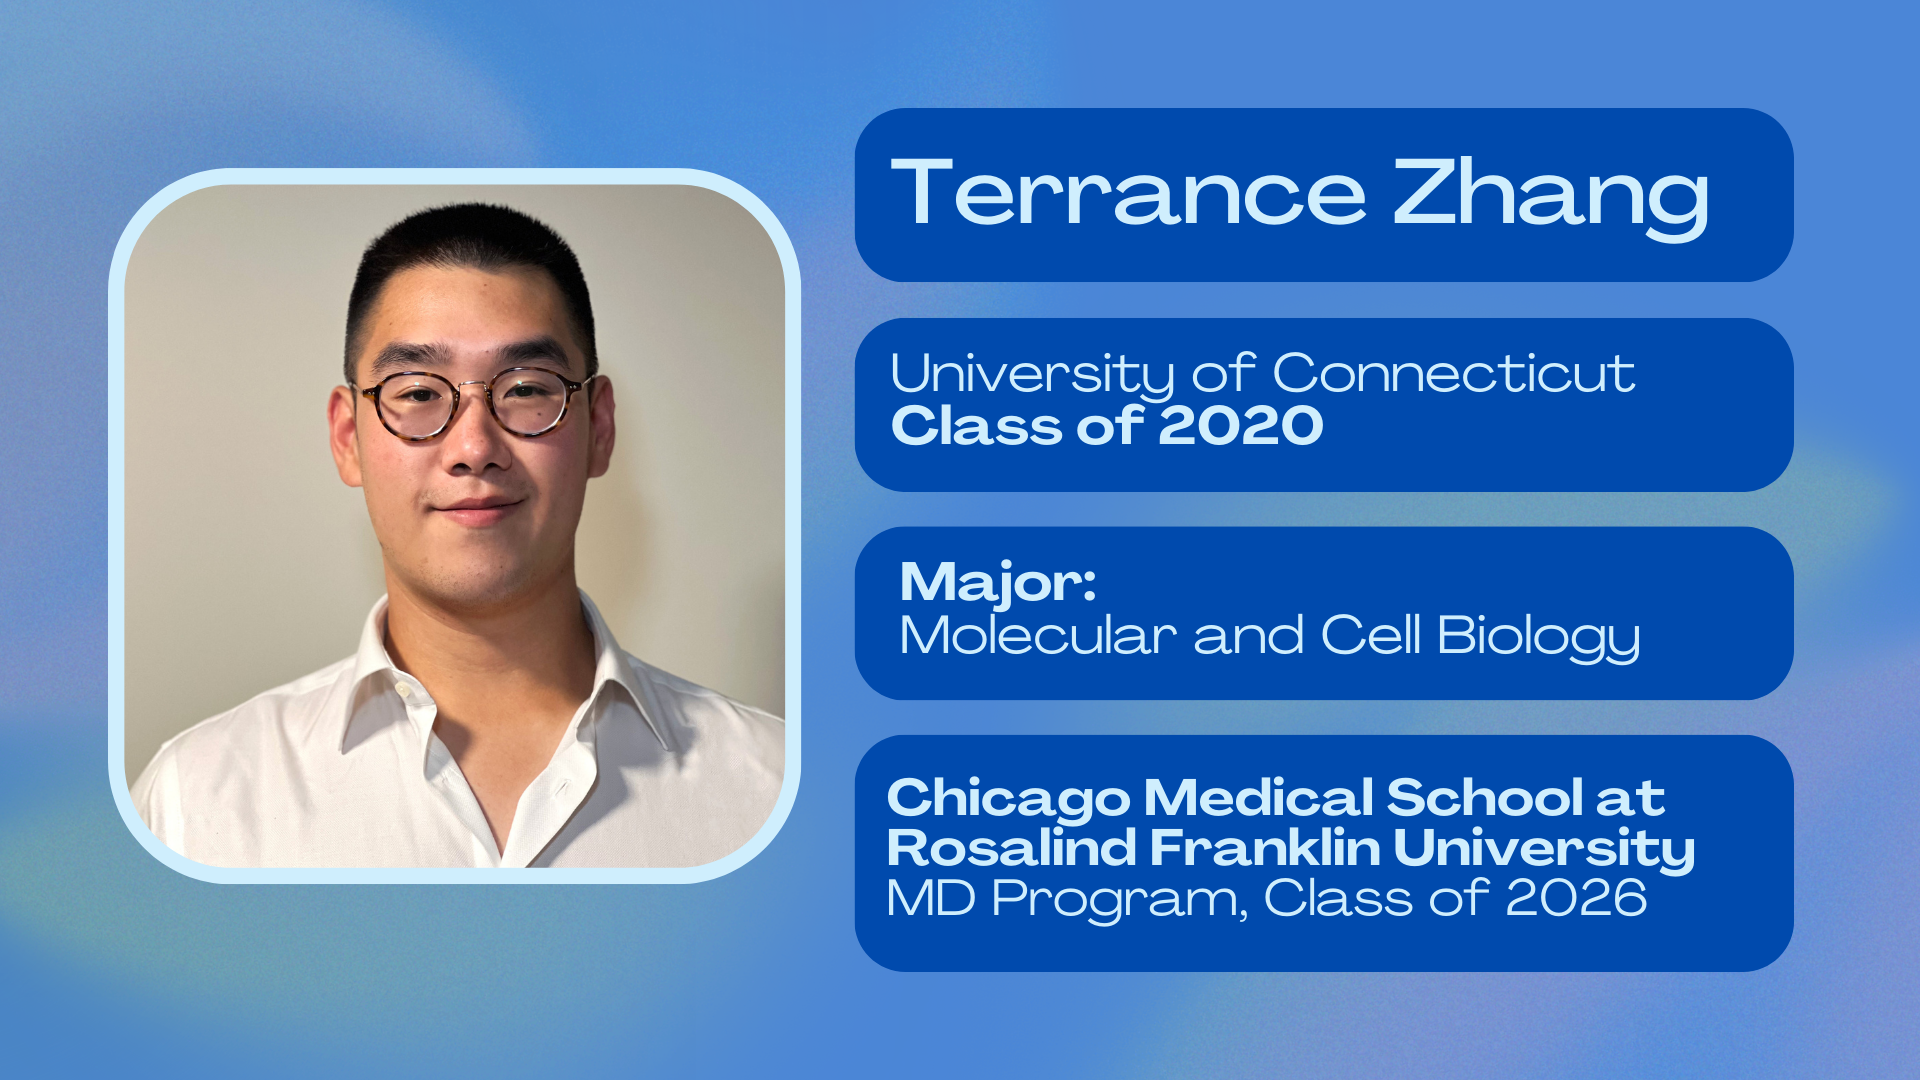 Terrance Zhang; University of Connecticut class of 2020; Major: Molecular and Cell Biology; Chicago Medical School at Rosalind Franklin University MD program class of 2026